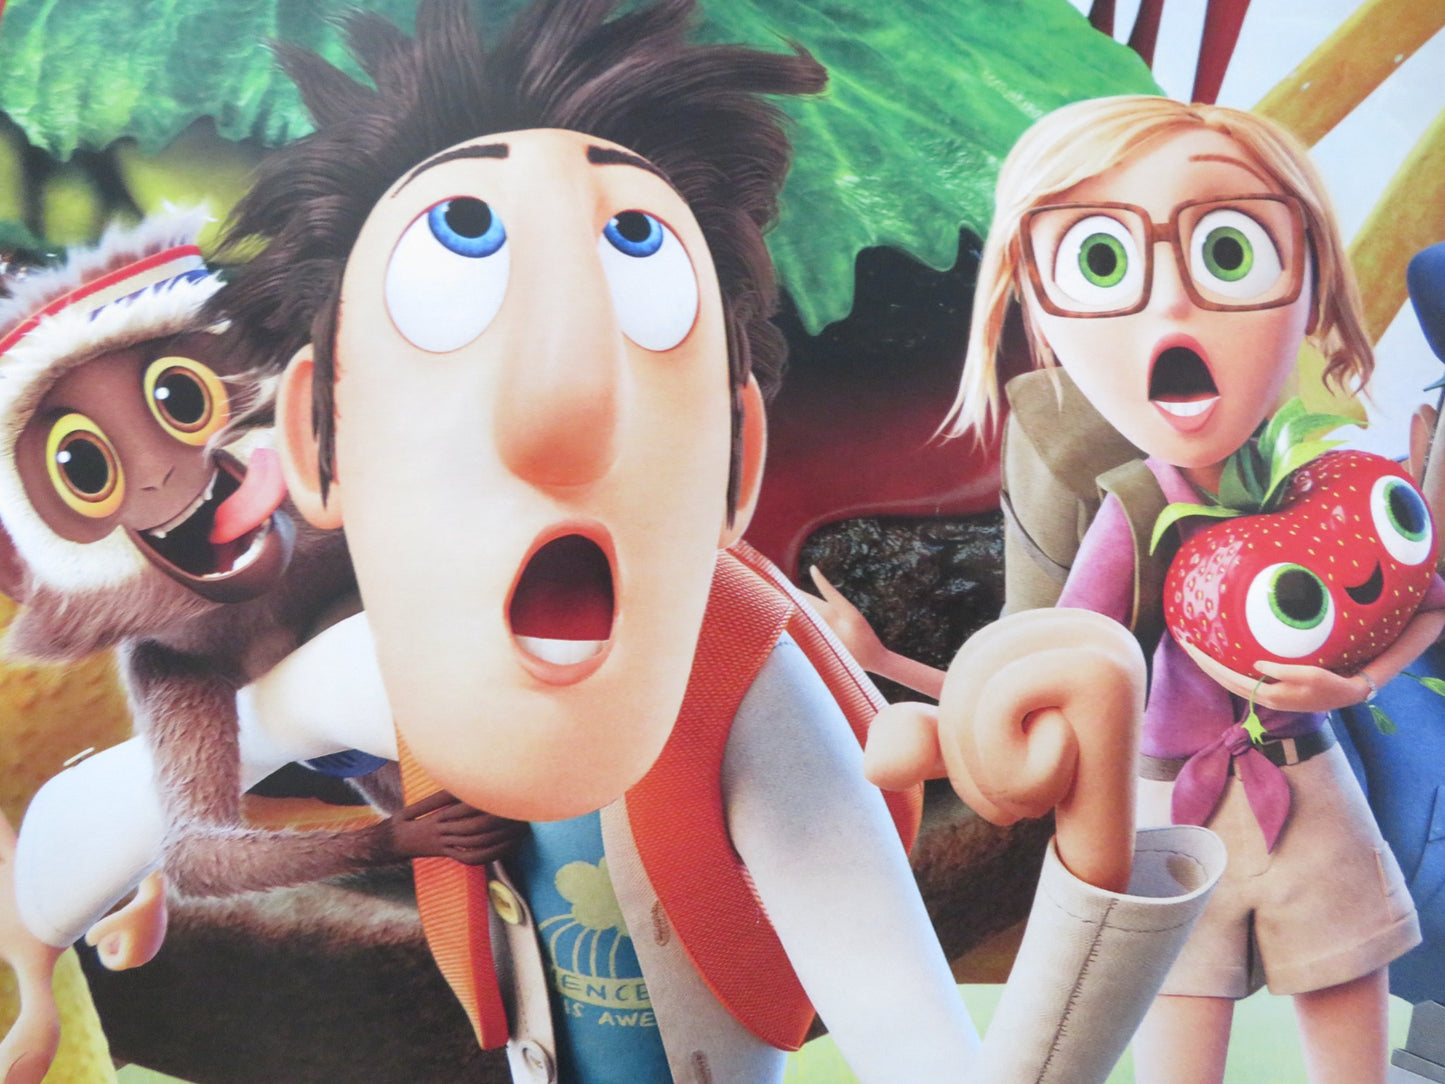 CLOUDY WITH A CHANCE OF MEATBALLS 2 UK QUAD (30"x 40") ROLLED POSTER 2013